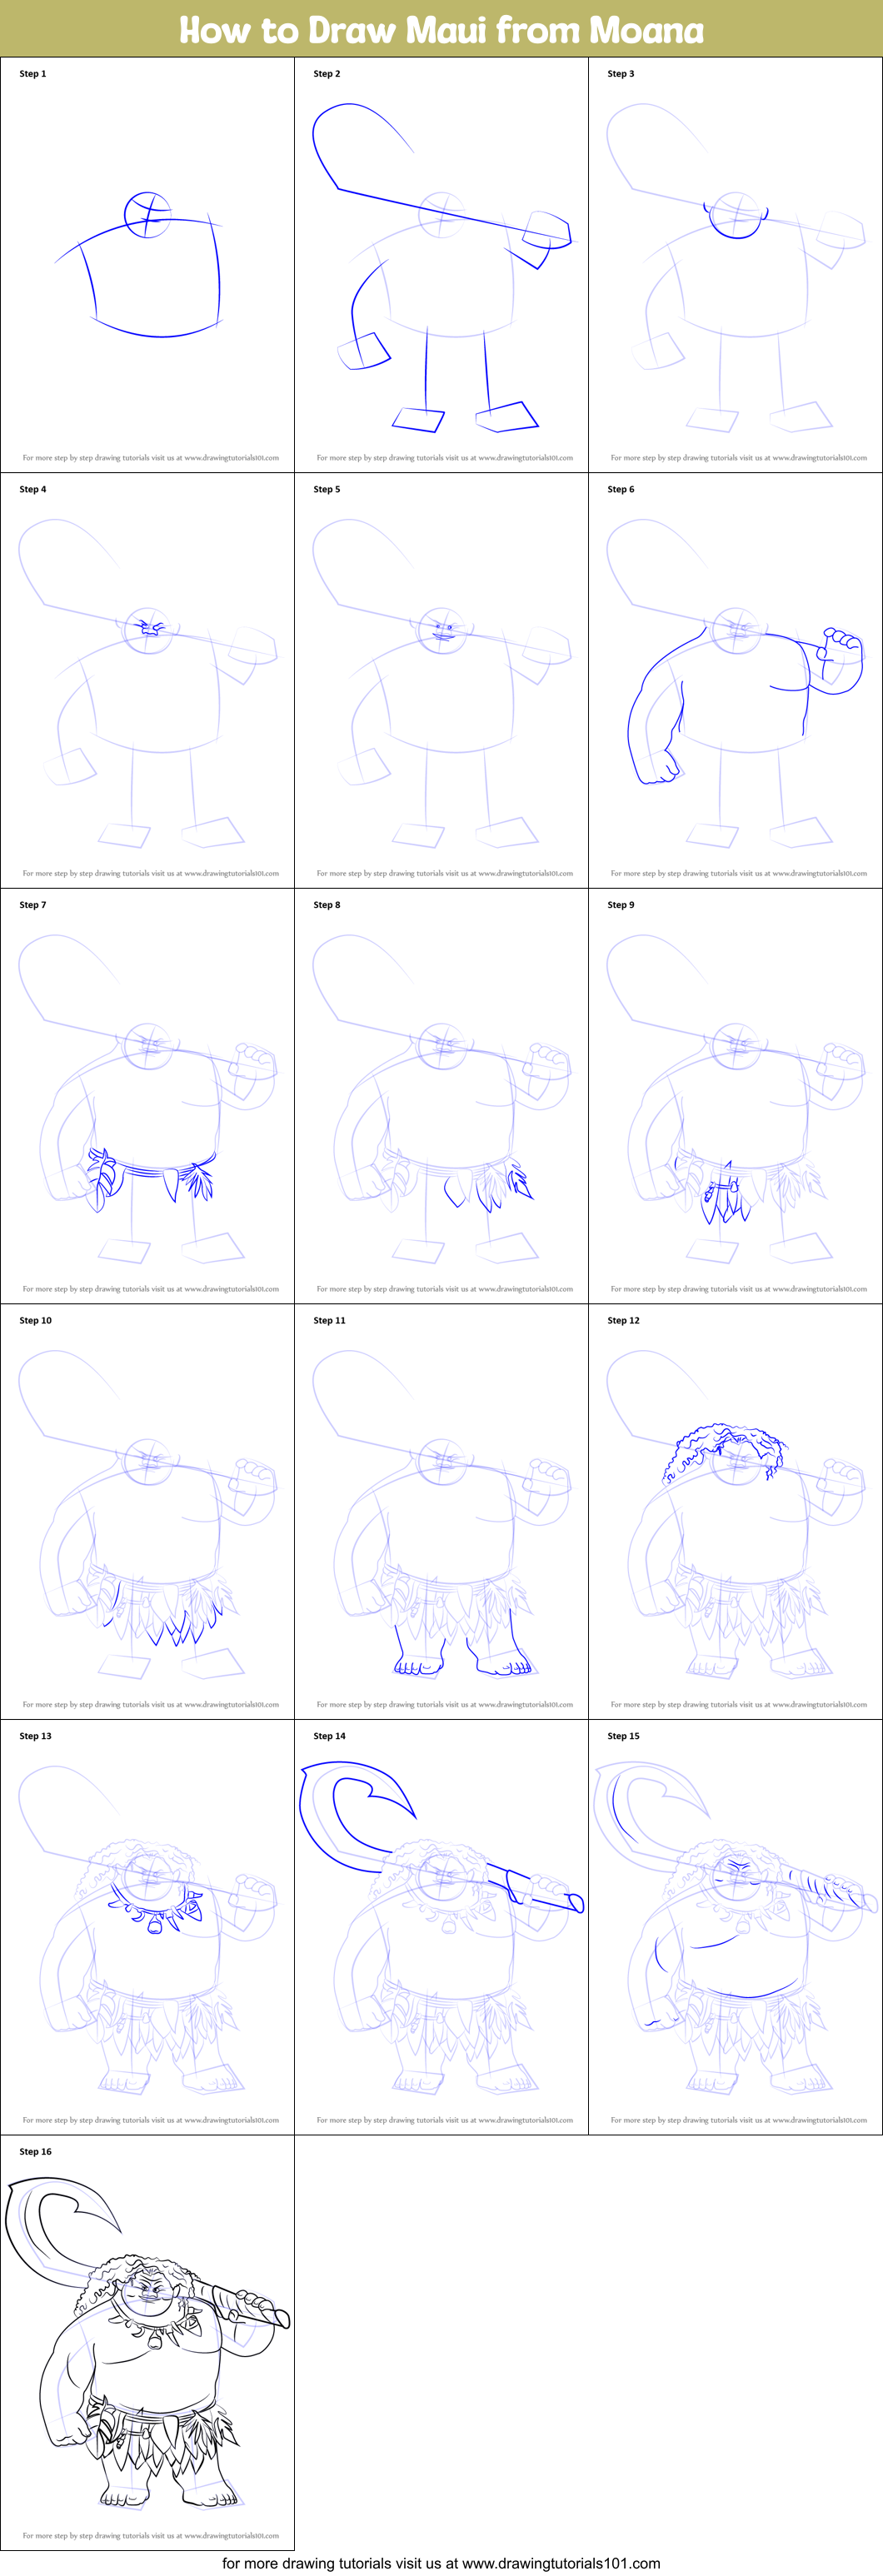 How to Draw Maui from Moana printable step by step drawing sheet ...